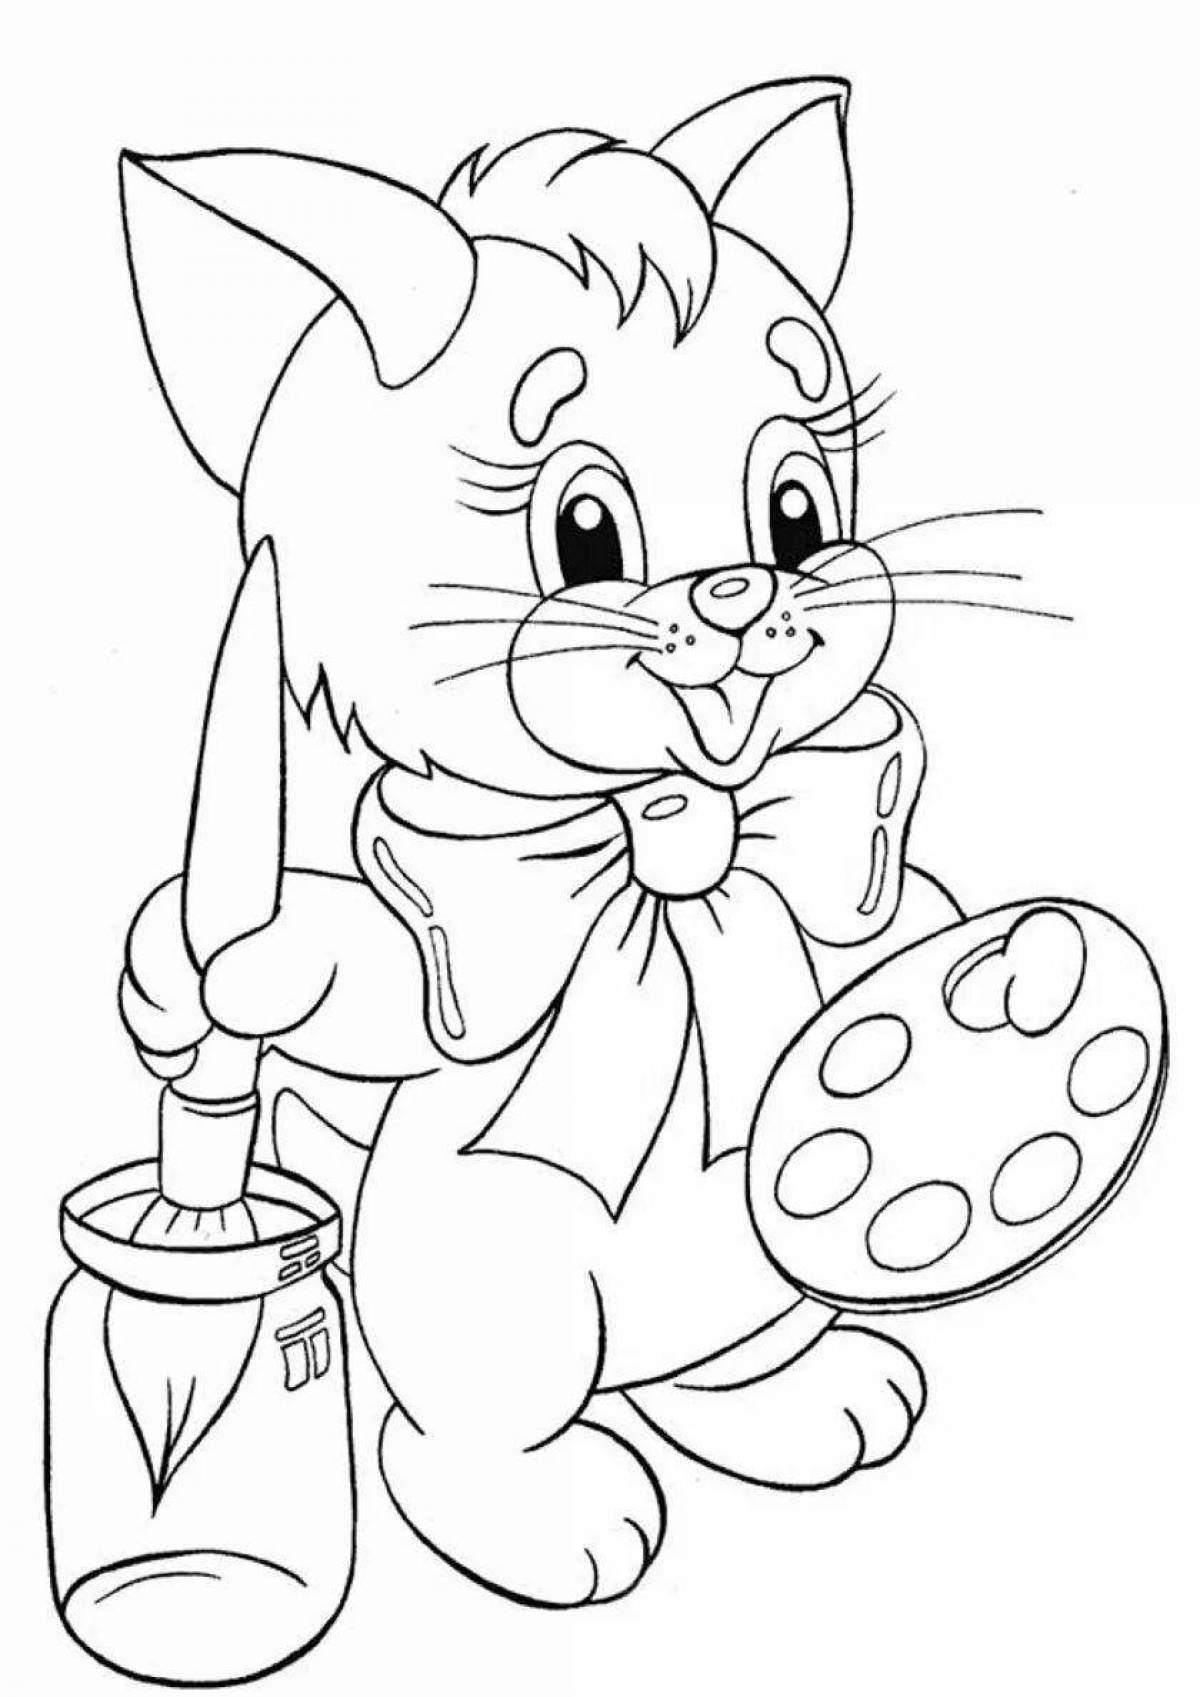 Cute coloring pages for girls 5 years old animals